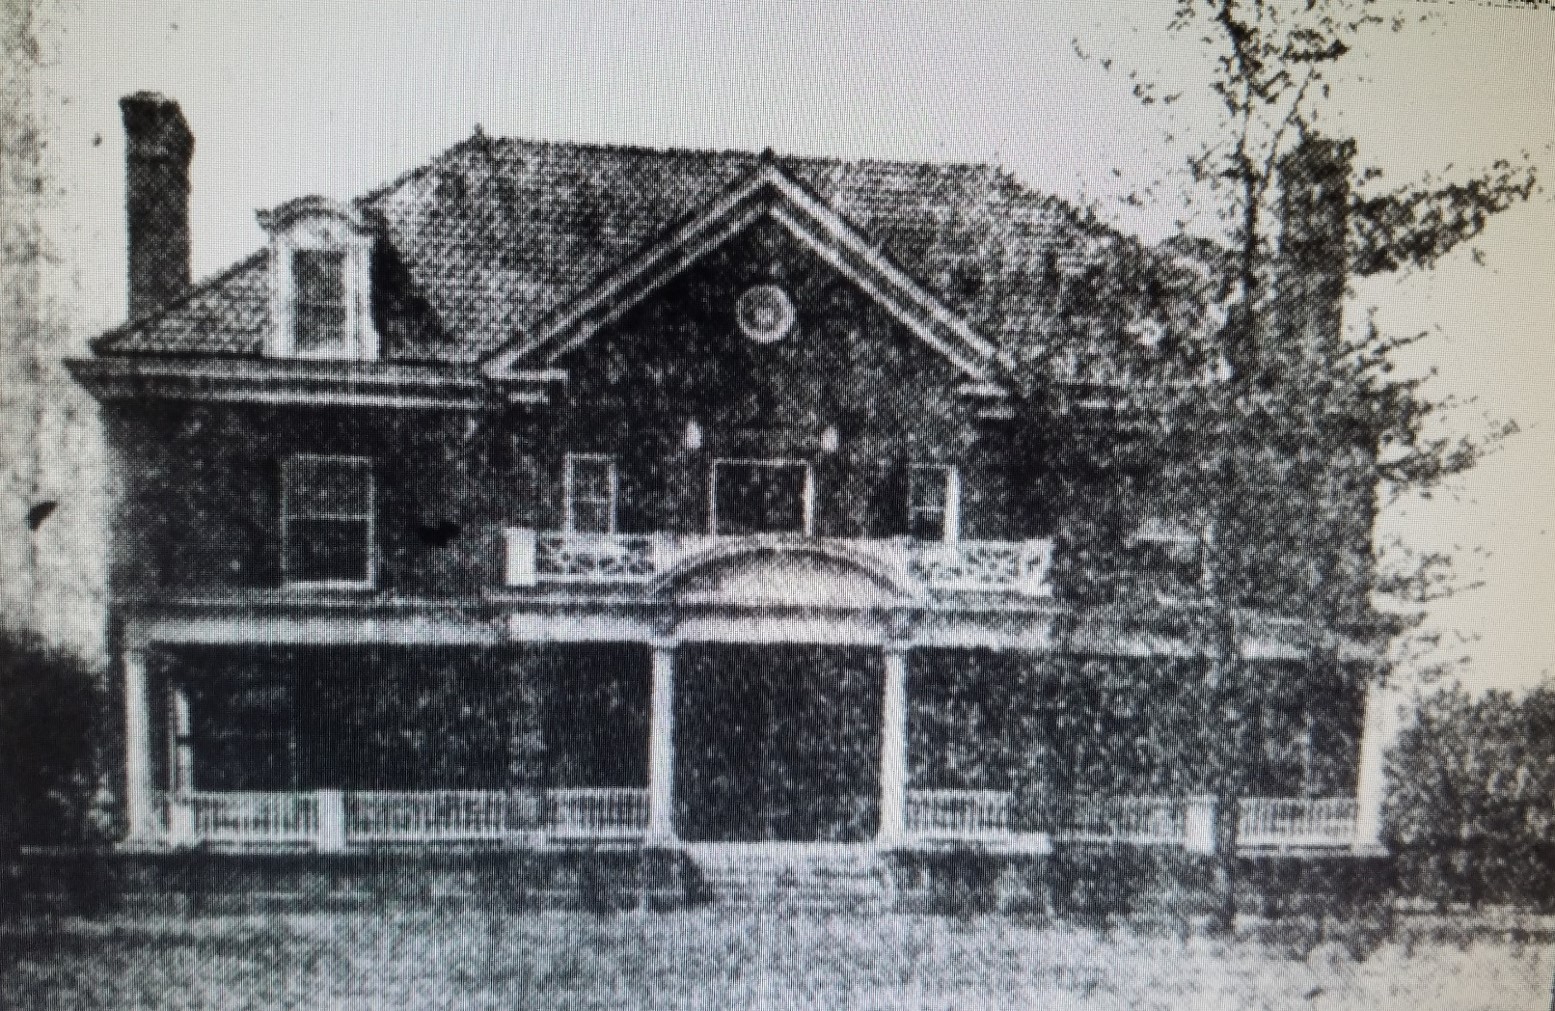 An old photo of Browne Center in black and white. Three stories with a wide porch.